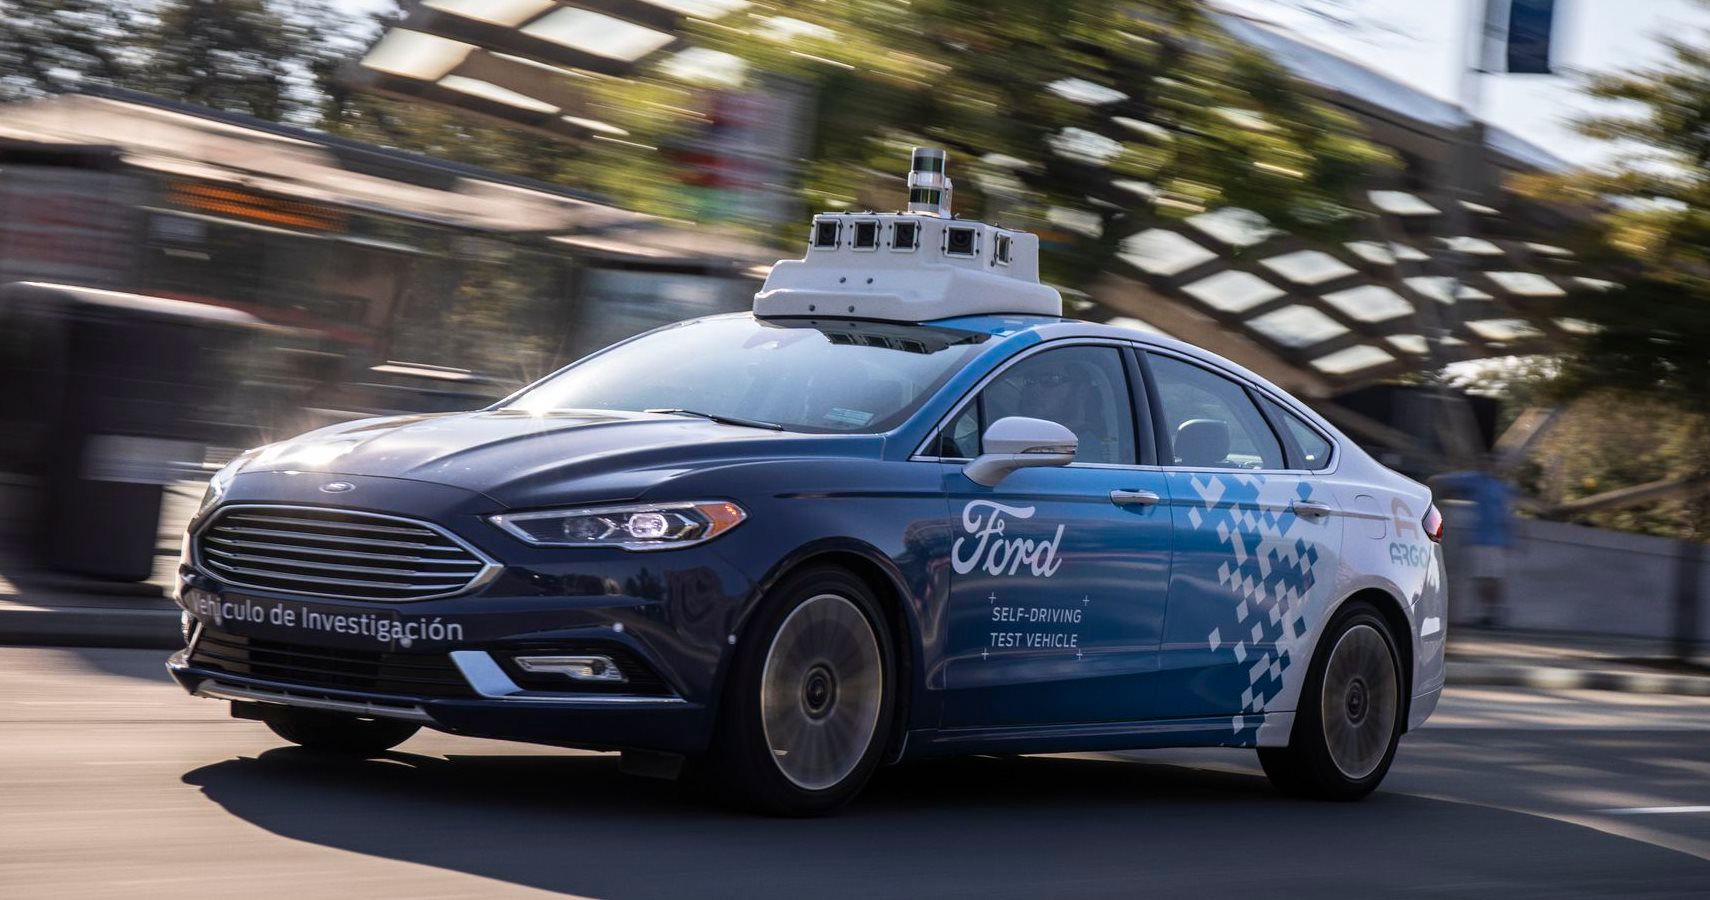 Ford CEO Says They "Overestimated" The Importance Of Autonomous Cars